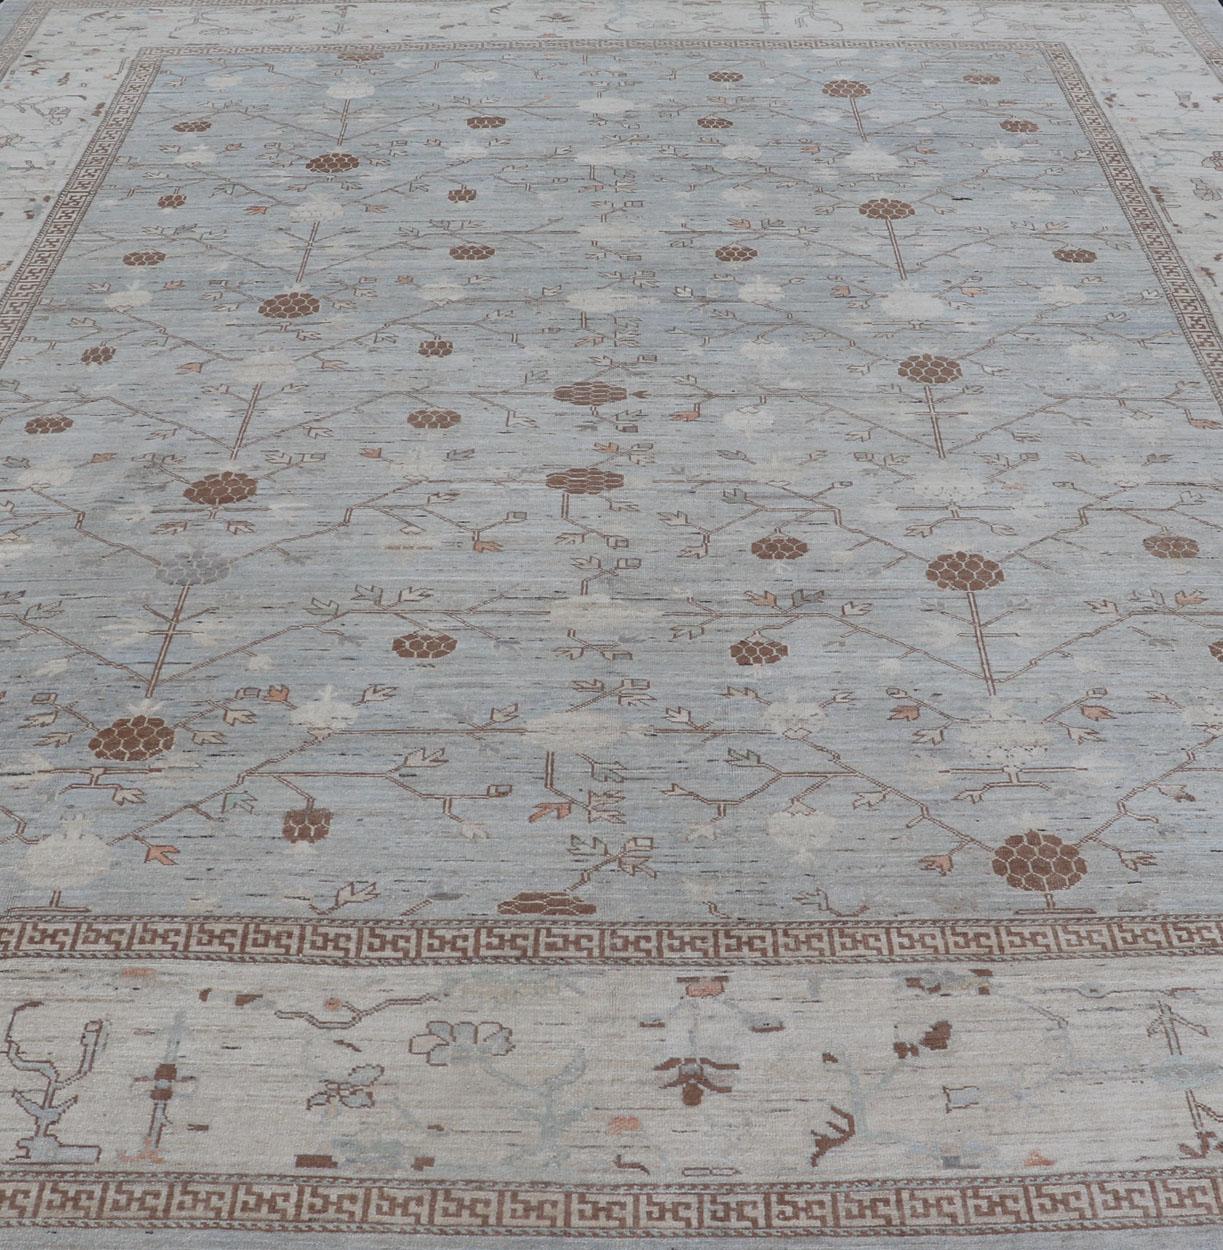 Large All-Over Design Khotan Rug in Grey Blue, Light Brown, Ivory & Taupe In Excellent Condition For Sale In Atlanta, GA